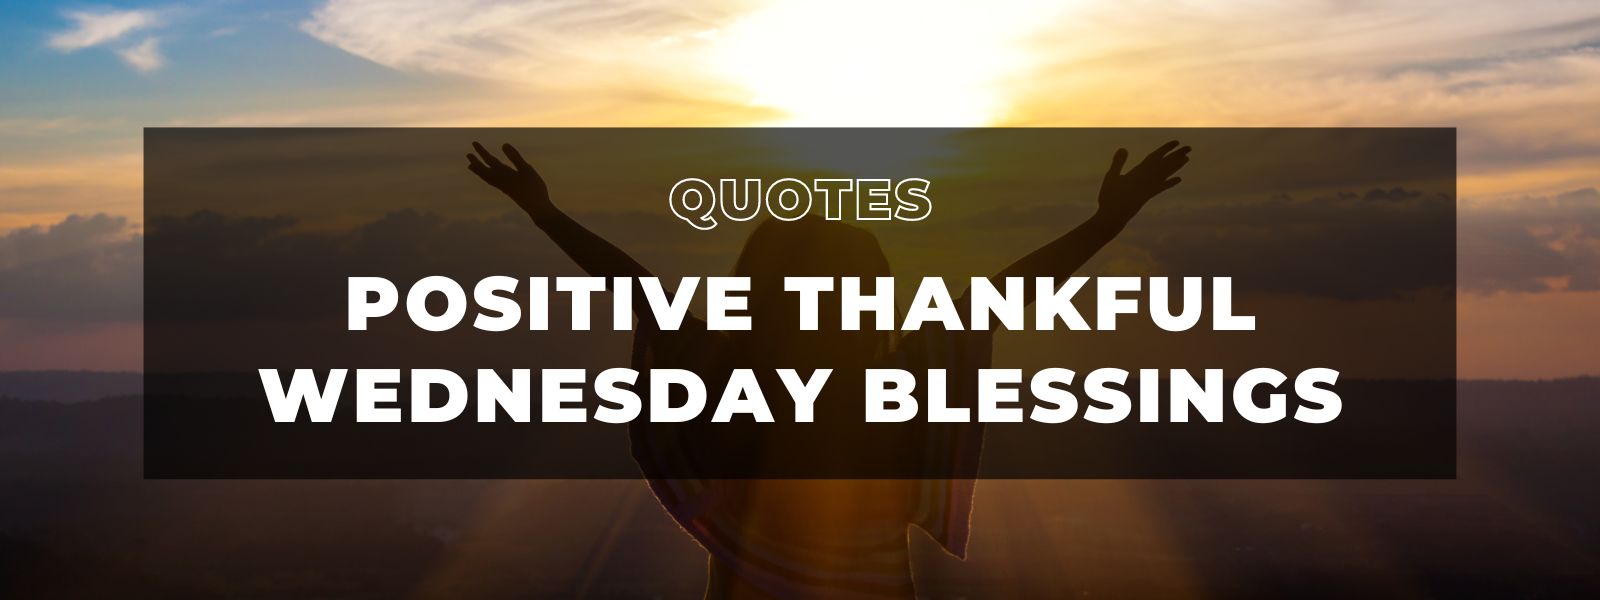 Positive Thankful Wednesday Blessings Banner